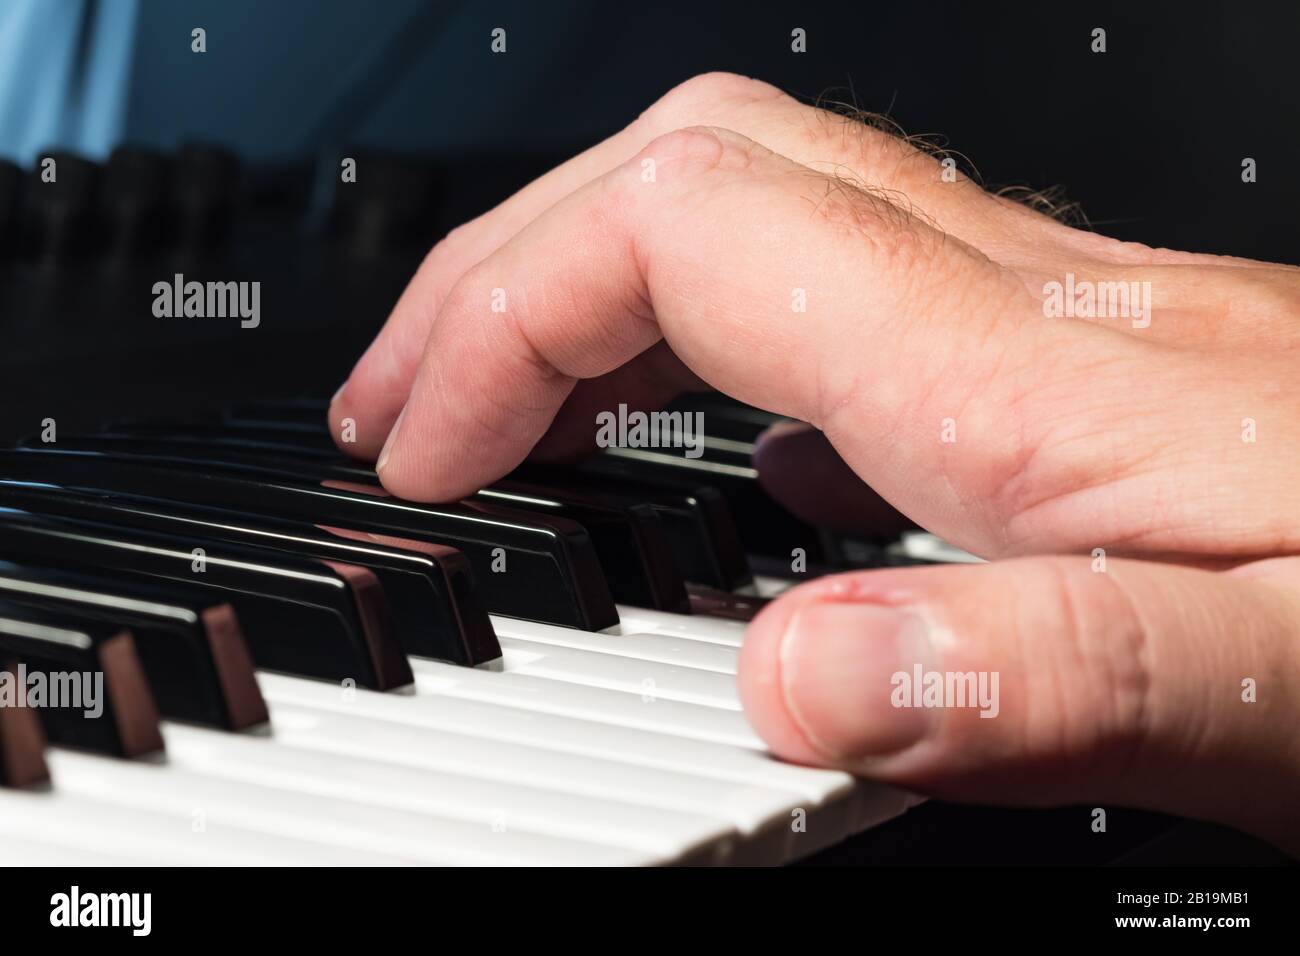 Hand on a piano or synthesizer keyboard pressing keys or notes to make music. Musician playing notes on a synthesiser keyboard. Stock Photo